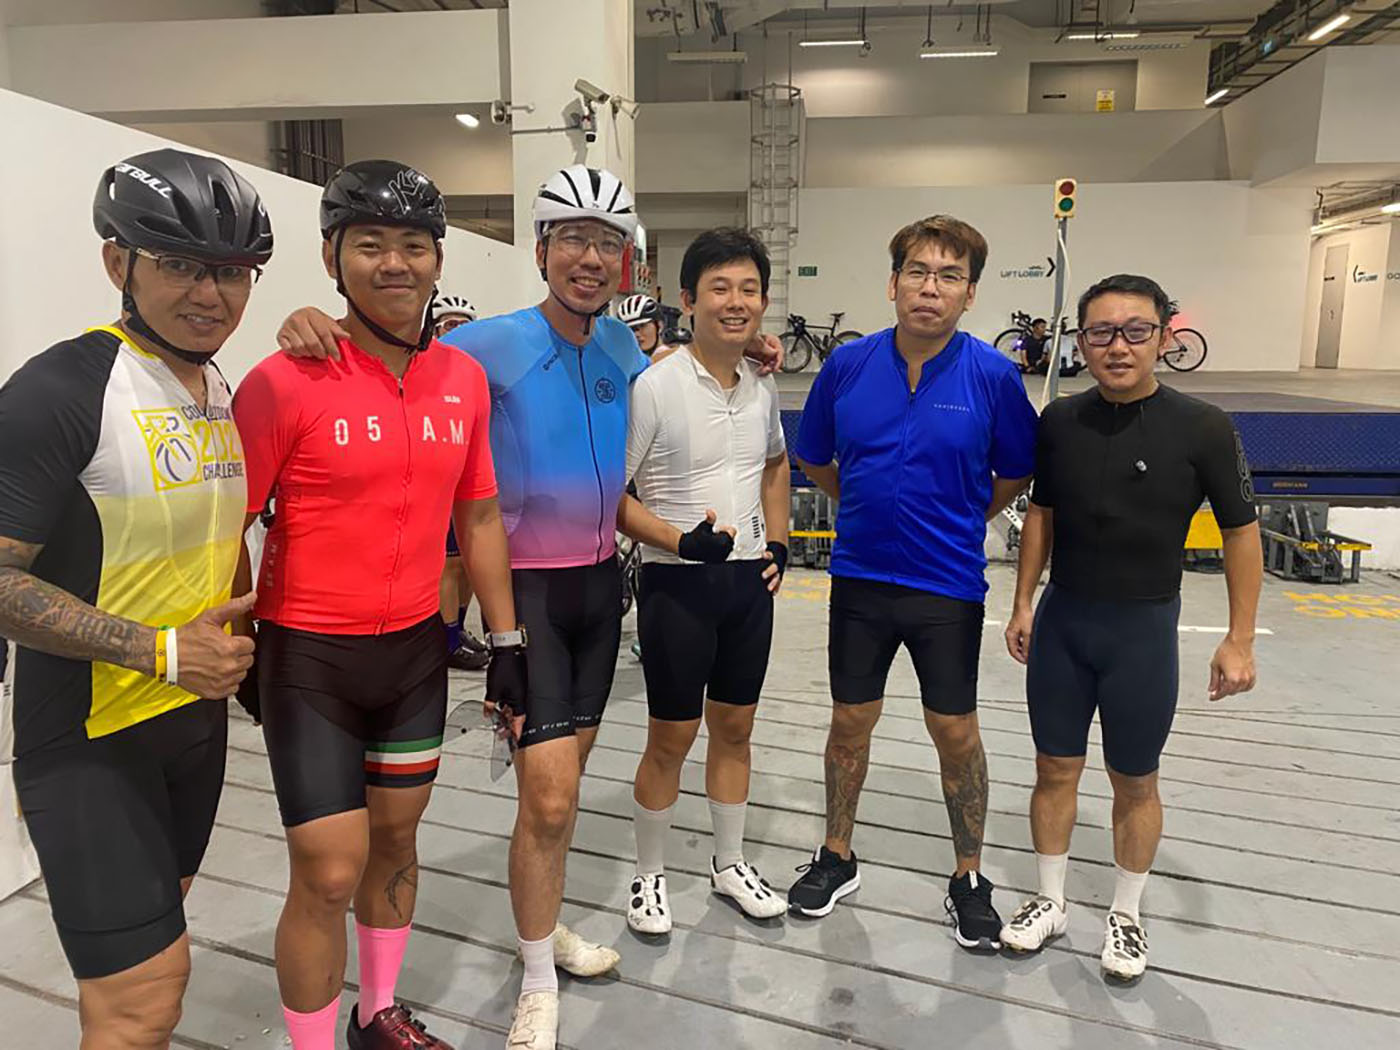 Andrew Ong (third from left) with fellow members of Break the Cycle.